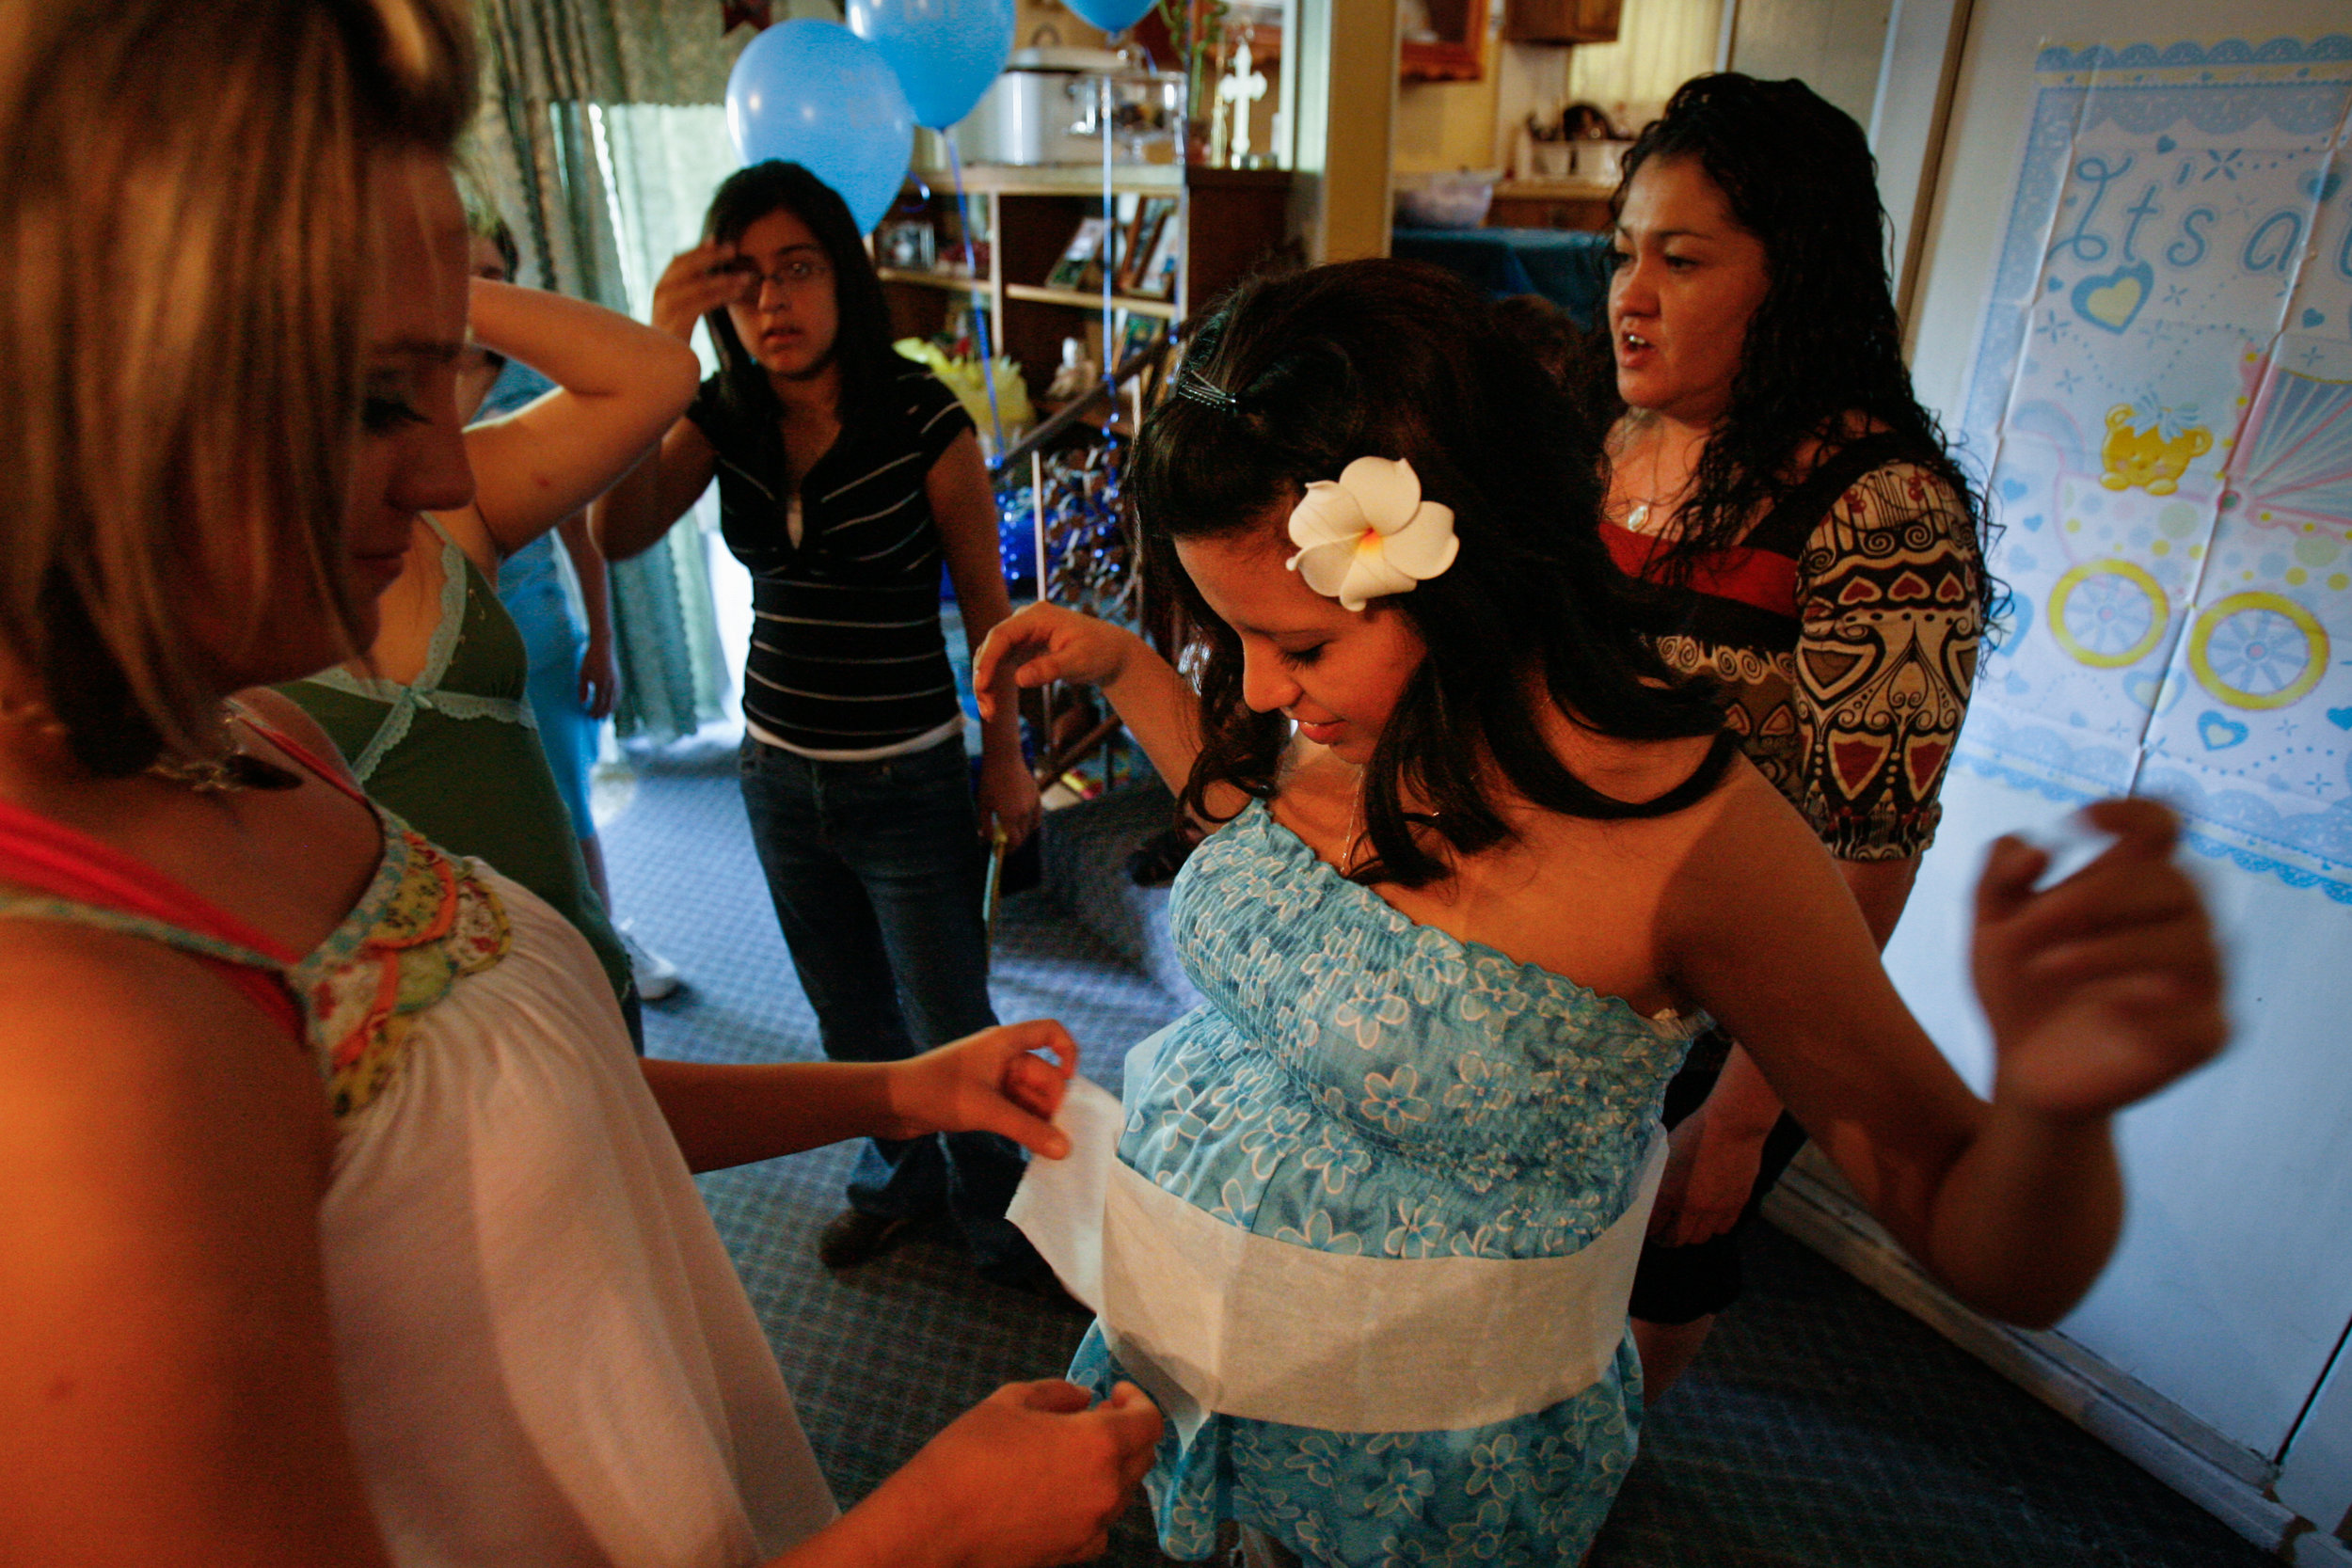  Friends and family play games with Dean Martinez, 17, center, during her baby shower April 19, 2008, in Odessa, Texas. 